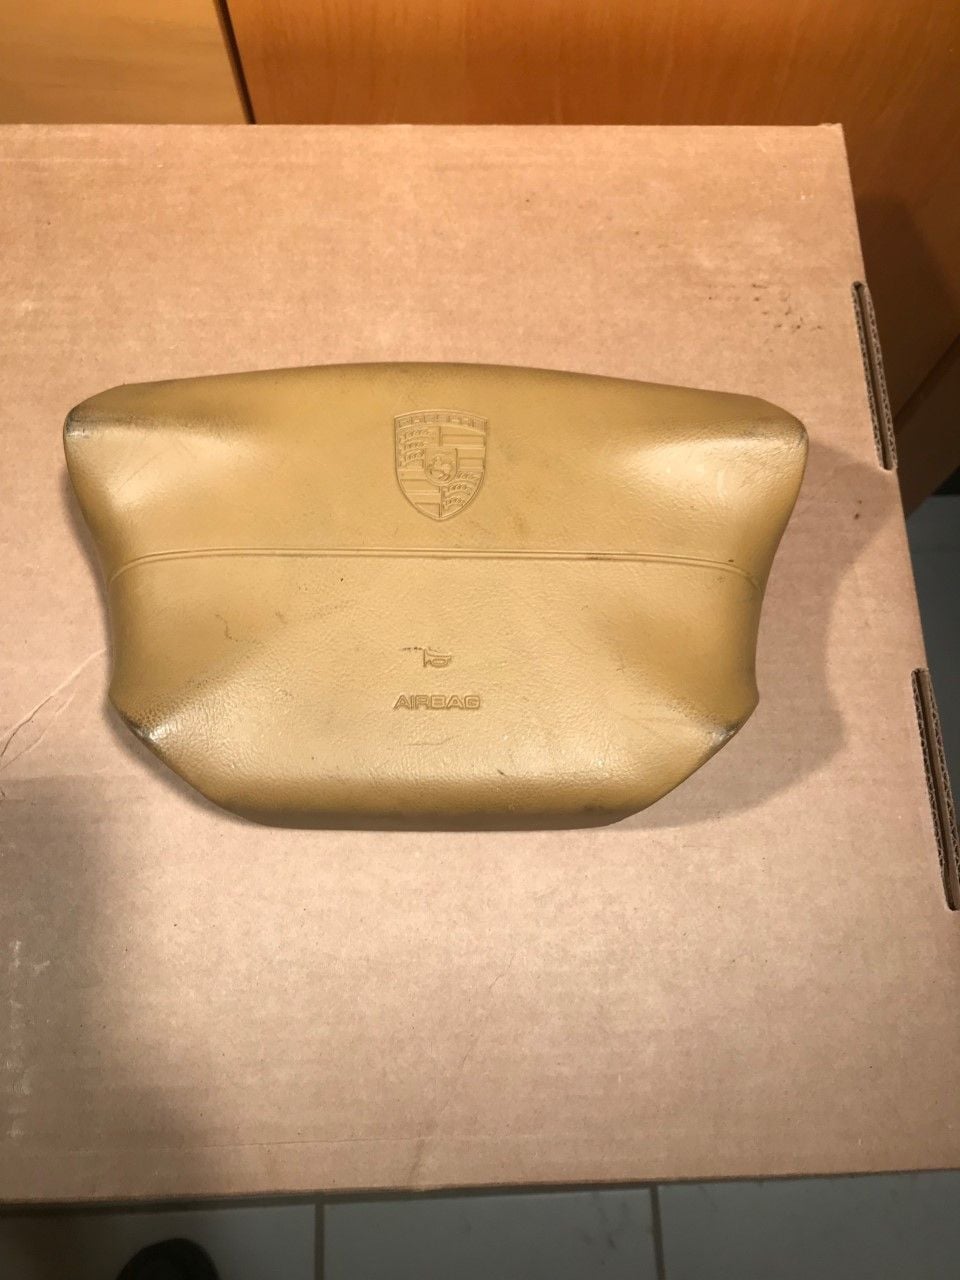 2000 Porsche 911 - 996 803 089 03 Driver Airbag - Accessories - $80 - Plainview, NY 11803, United States